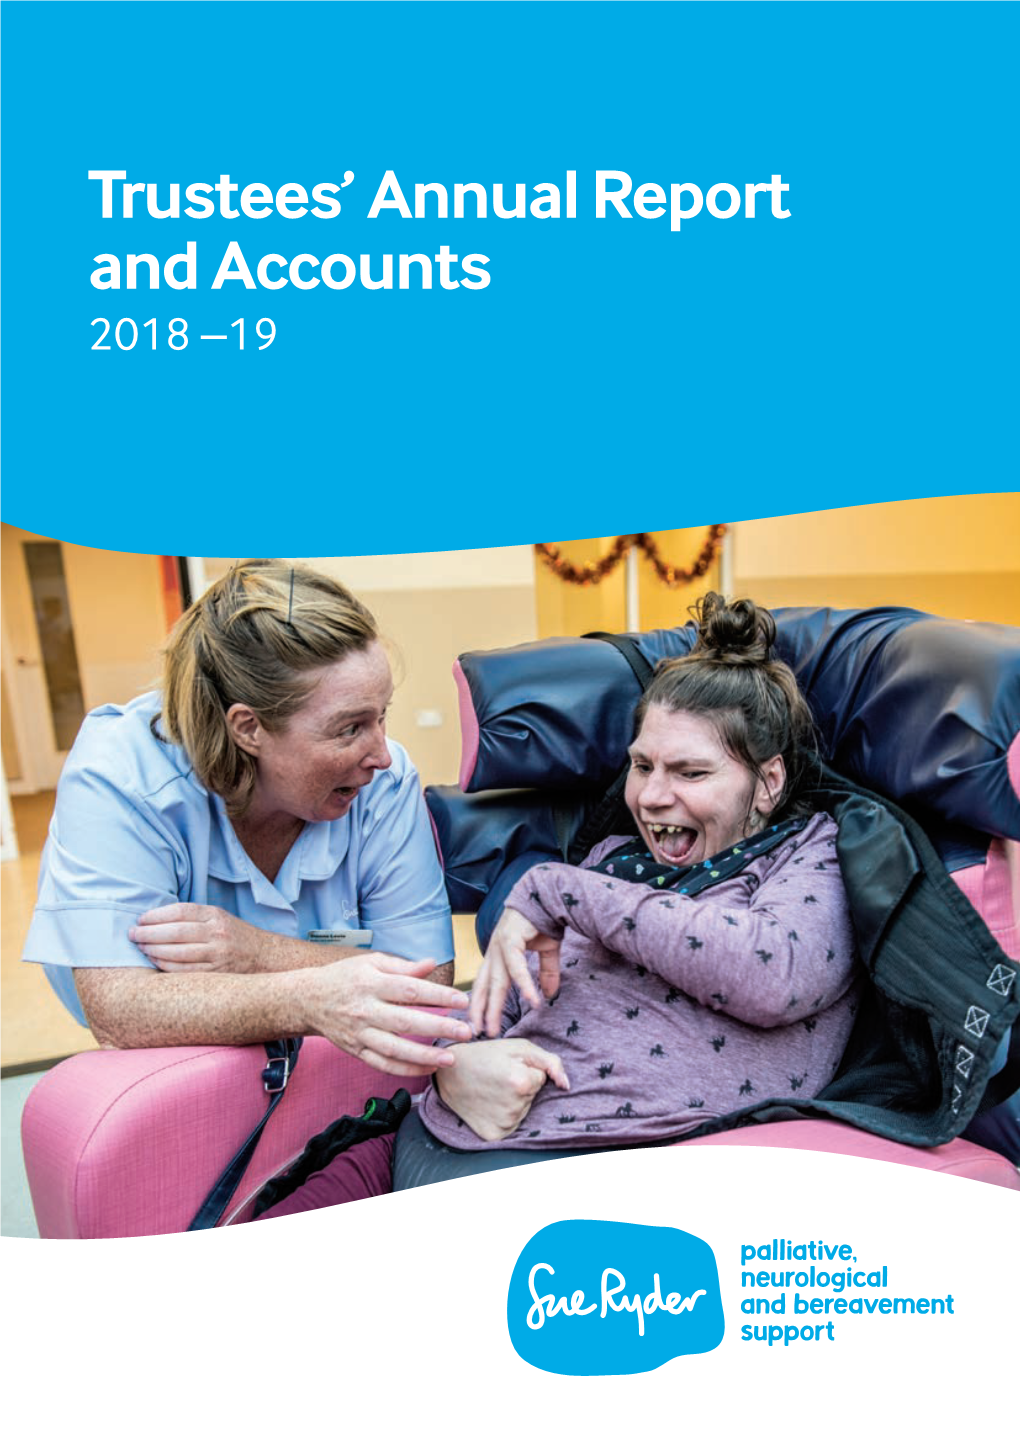 Trustees' Annual Report and Accounts